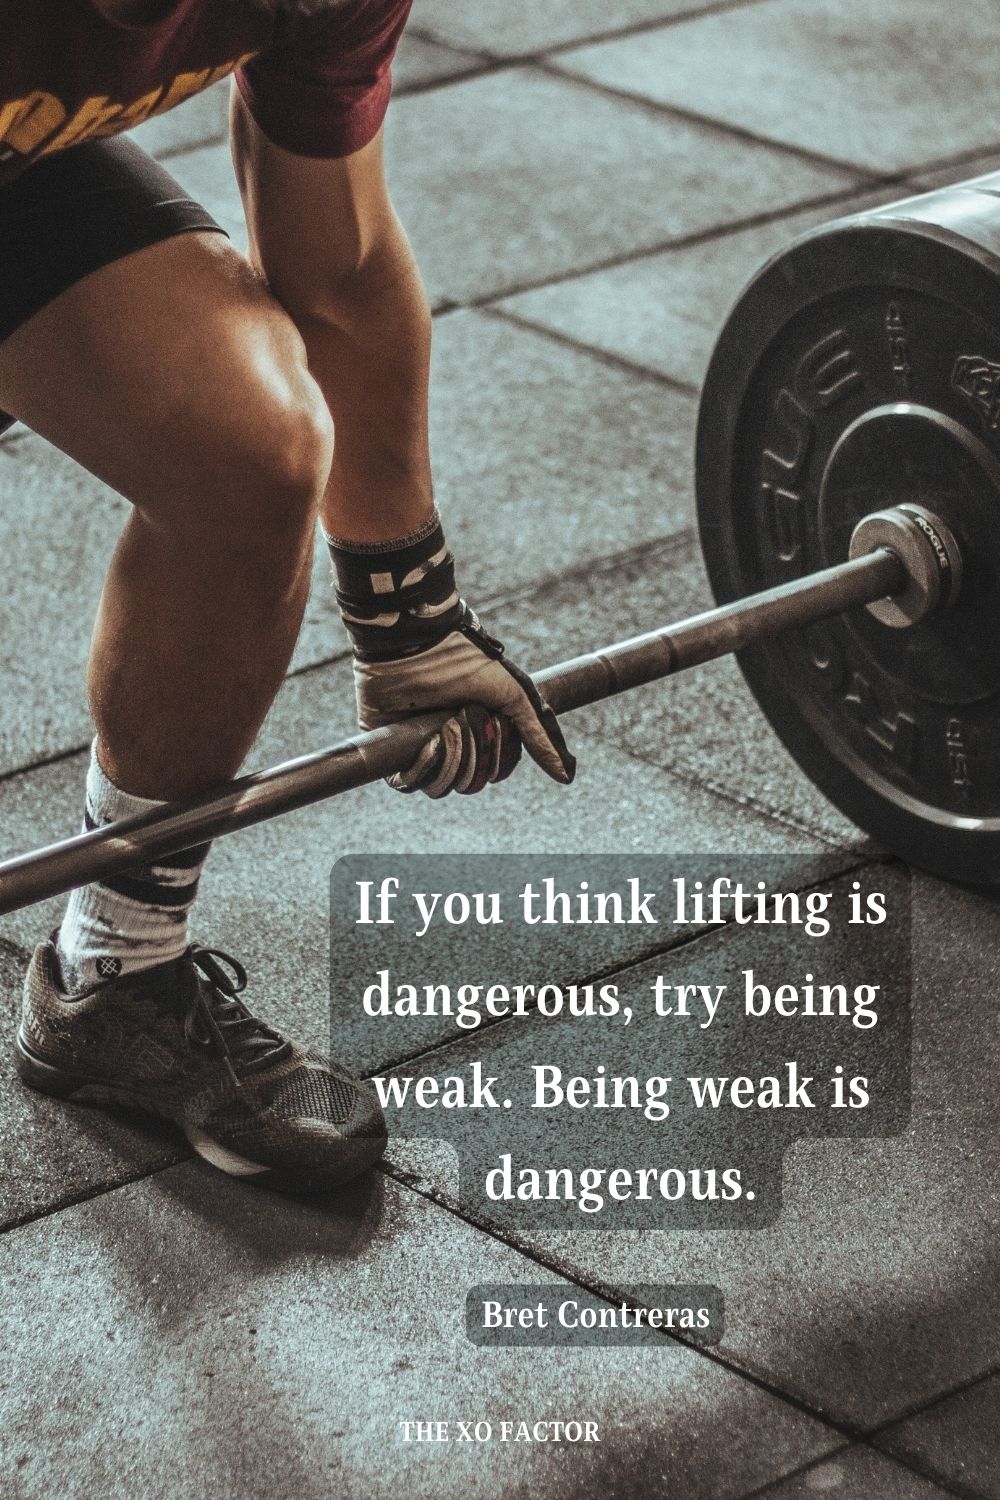 If you think lifting is dangerous, try being weak. Being weak is dangerous. Bret Contreras